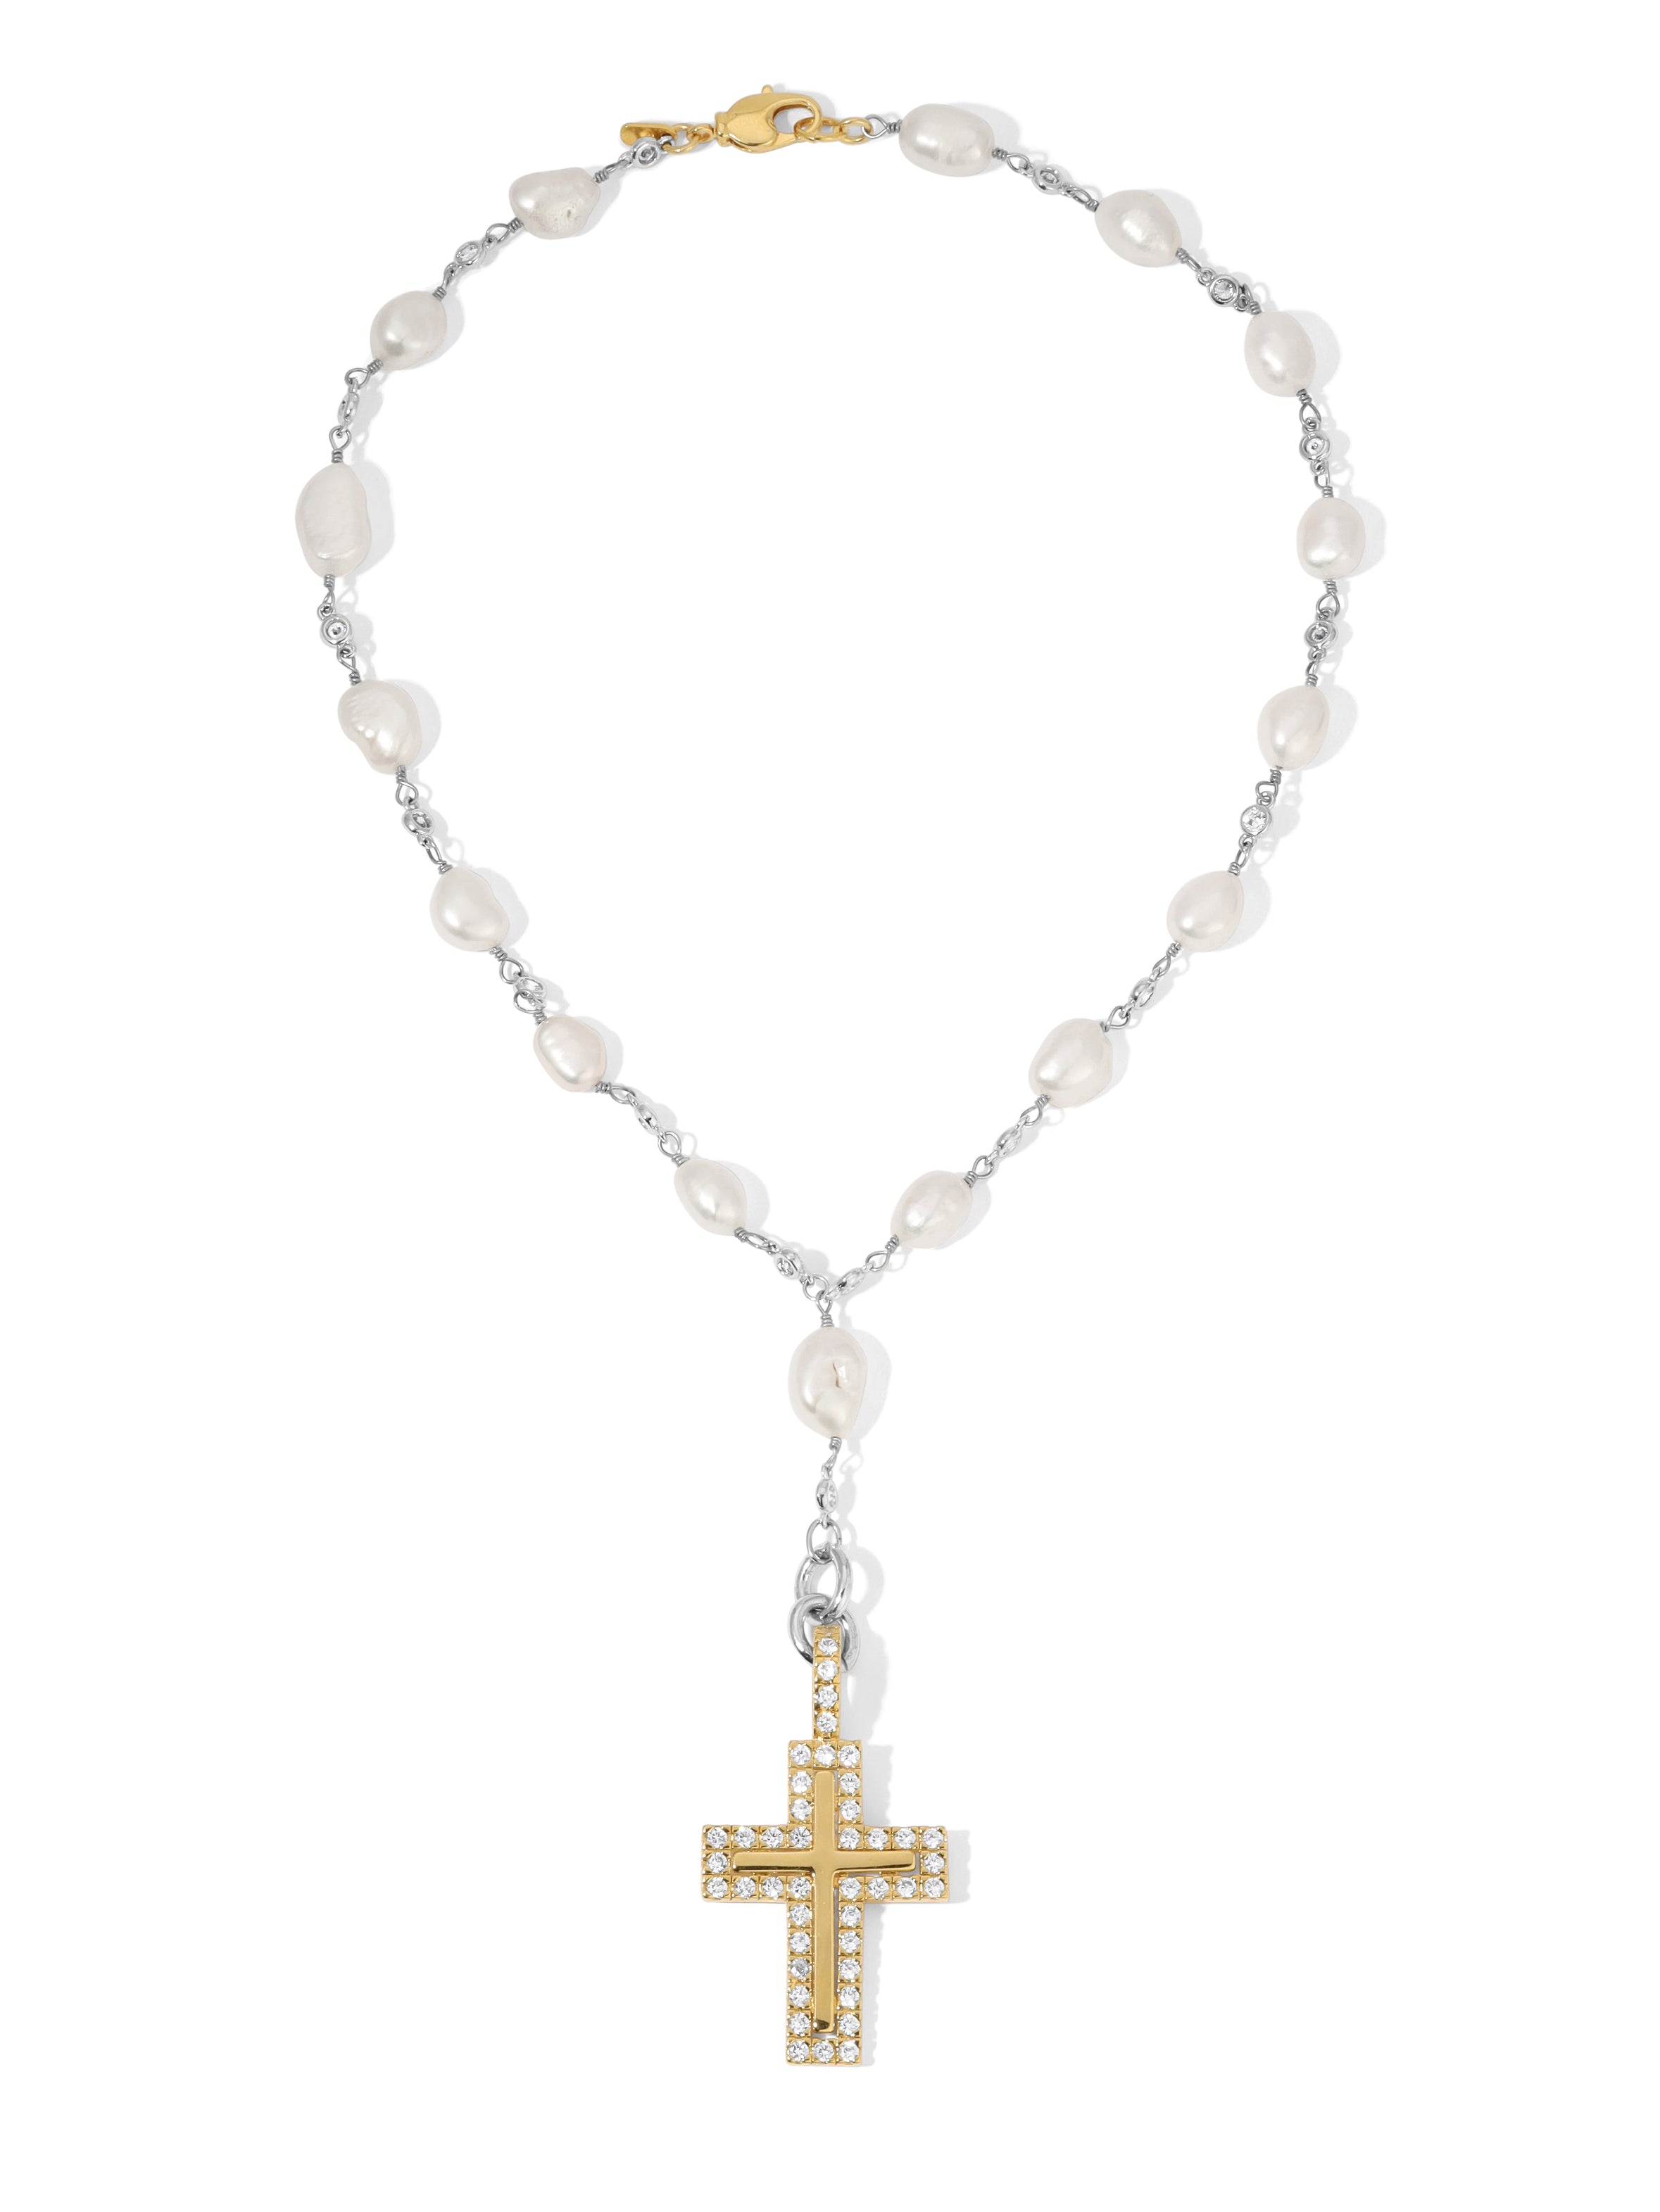 Nazareth Store White Pearl Rosary Beads Catholic Necklace Our Rose Lourdes  Medal & Cross Religious Gifts Rosaries for Women and Men : Amazon.in:  Fashion